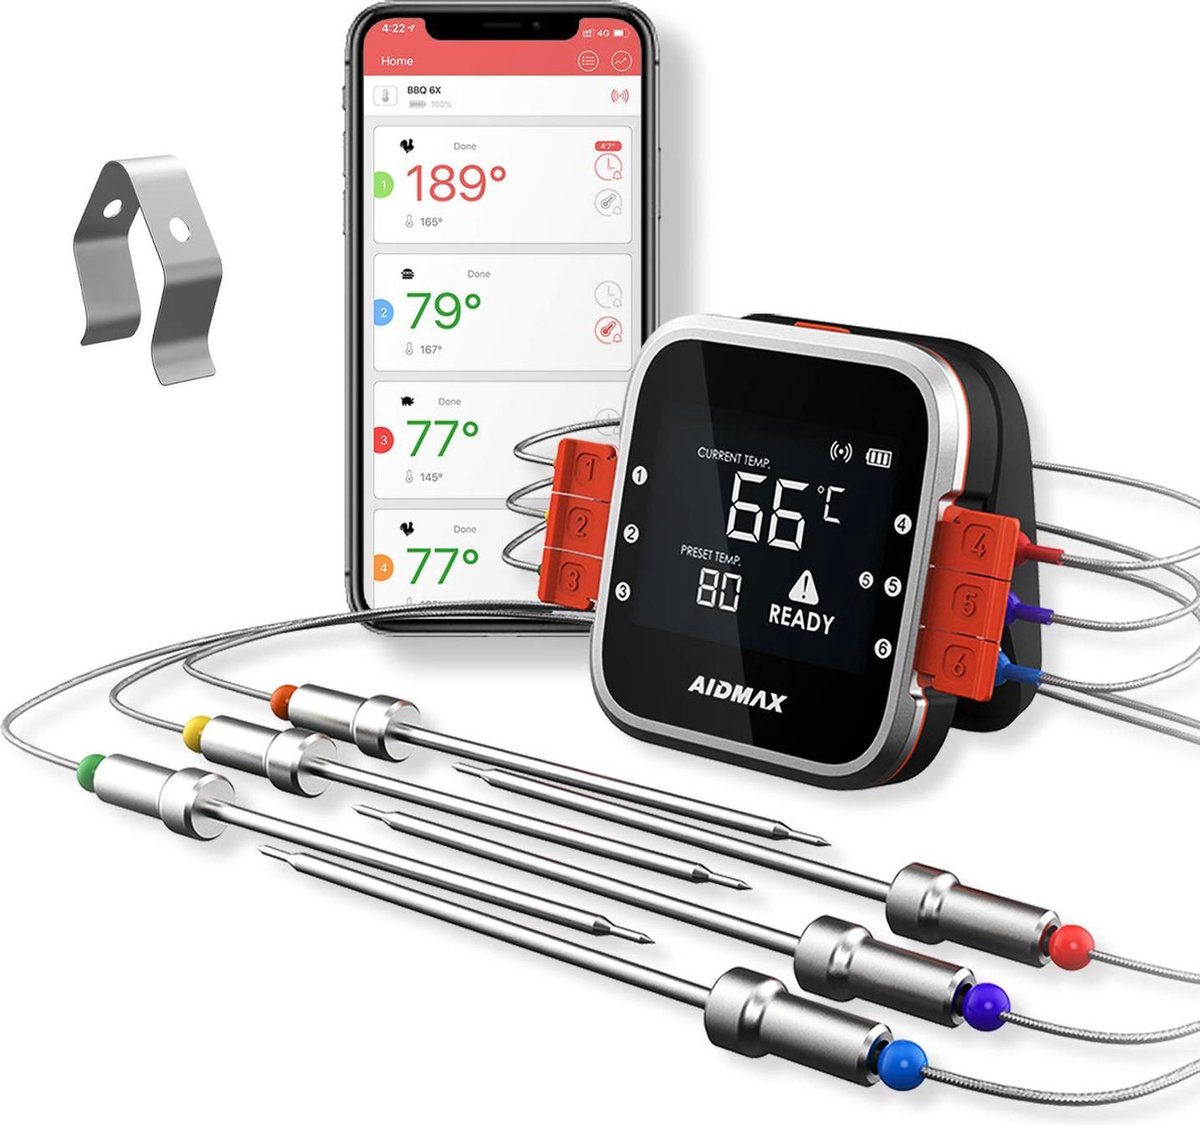 Bluetooth vlees thermometer met app Aidmax